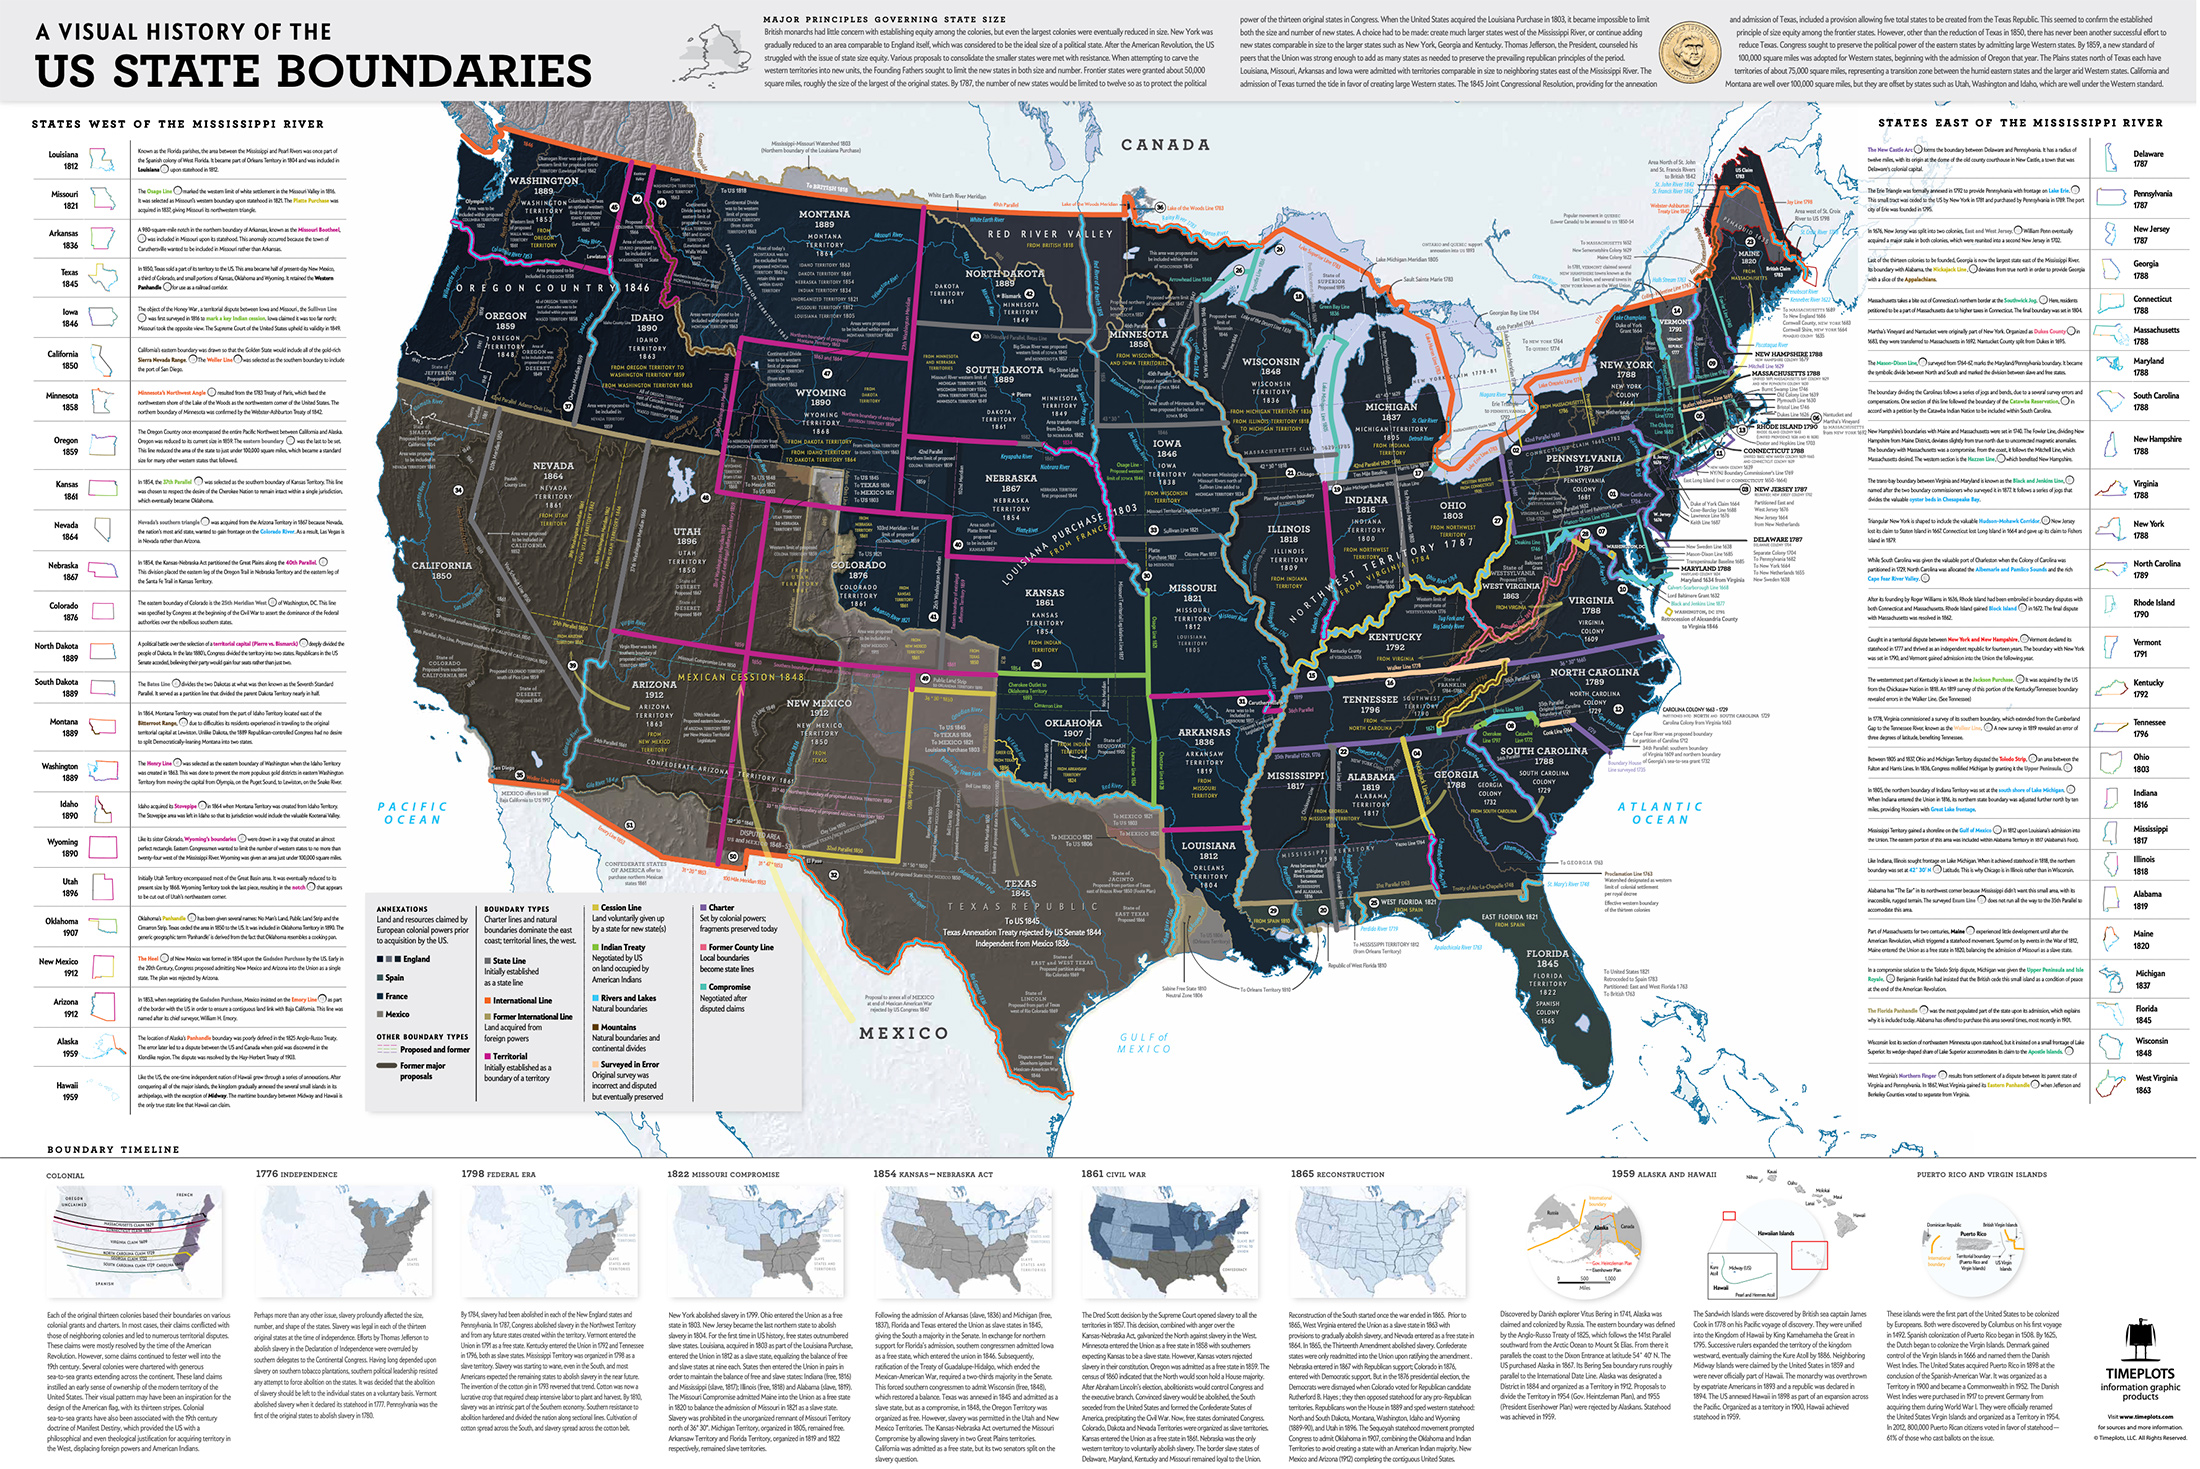 A map showing the history of U.S. State borders, as part of the Timeplots series of posters